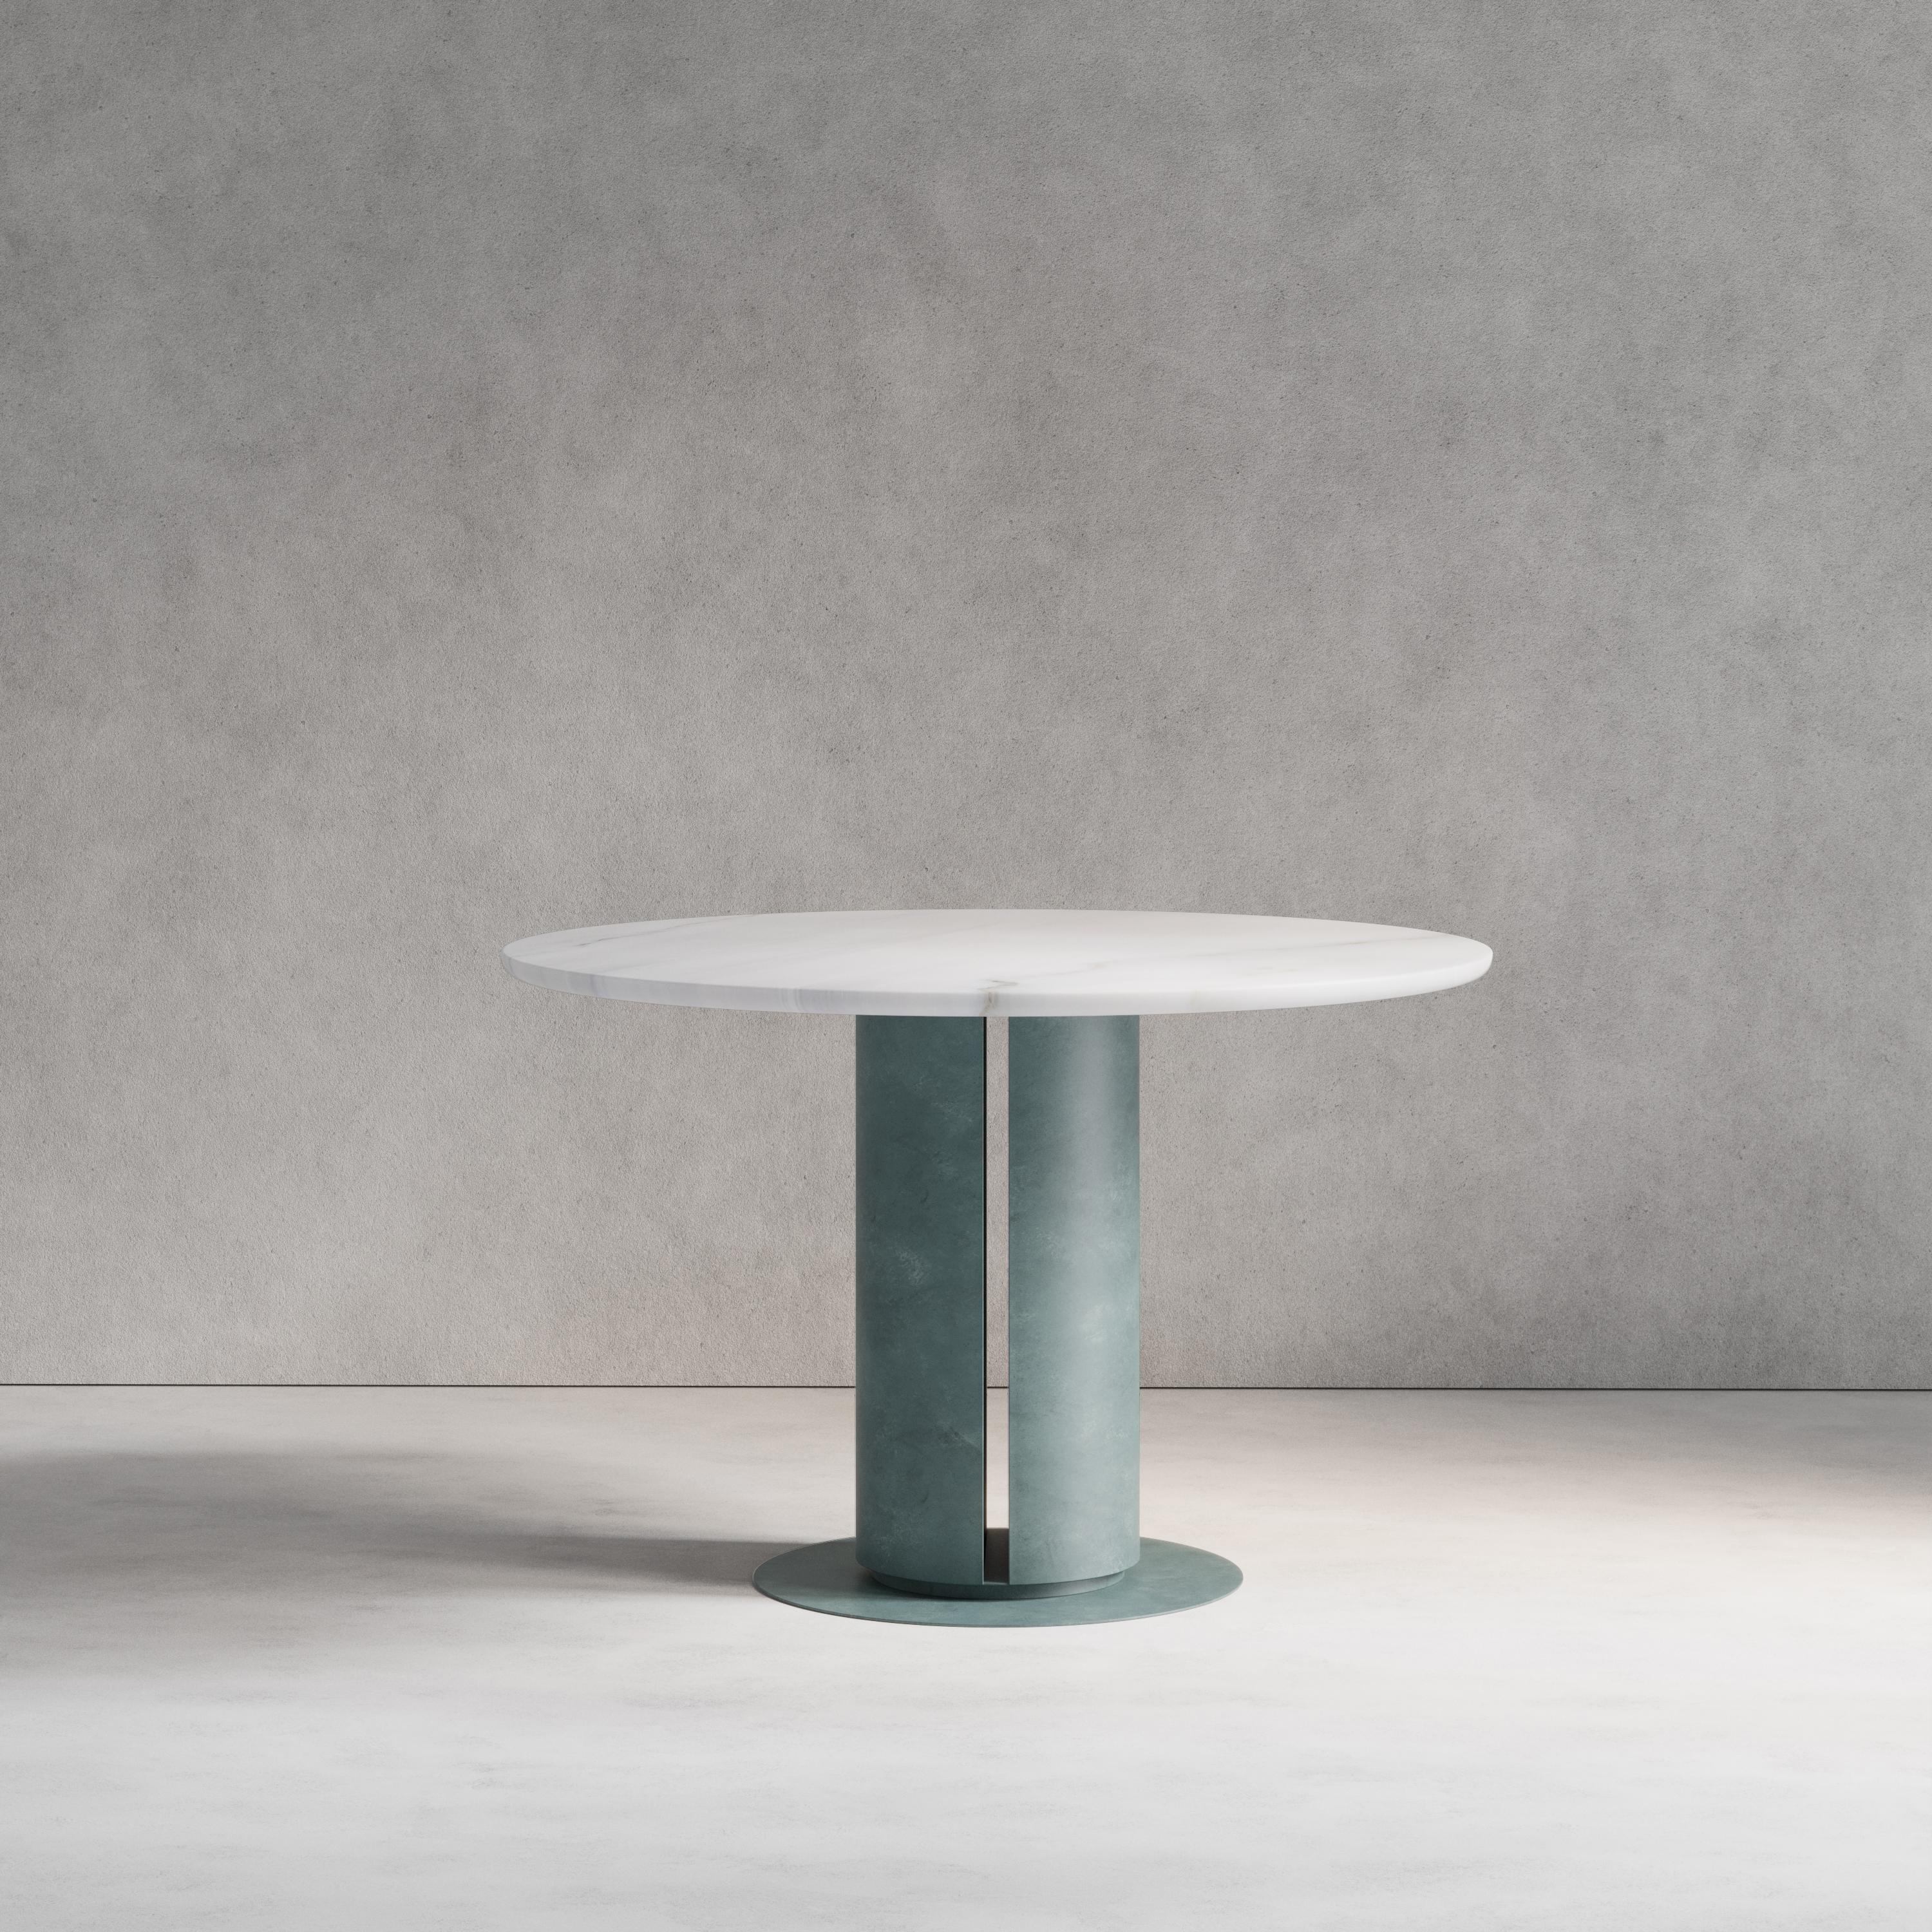 The Verdigris Dining Table combines both brass and marble, using patinated hand-spun brass and Bianco Lasa marble, this piece plays with both material properties and artisan finishes. Handmade in London.

Dimensions:
Dia. 120cm (47.24”) Height 76cm